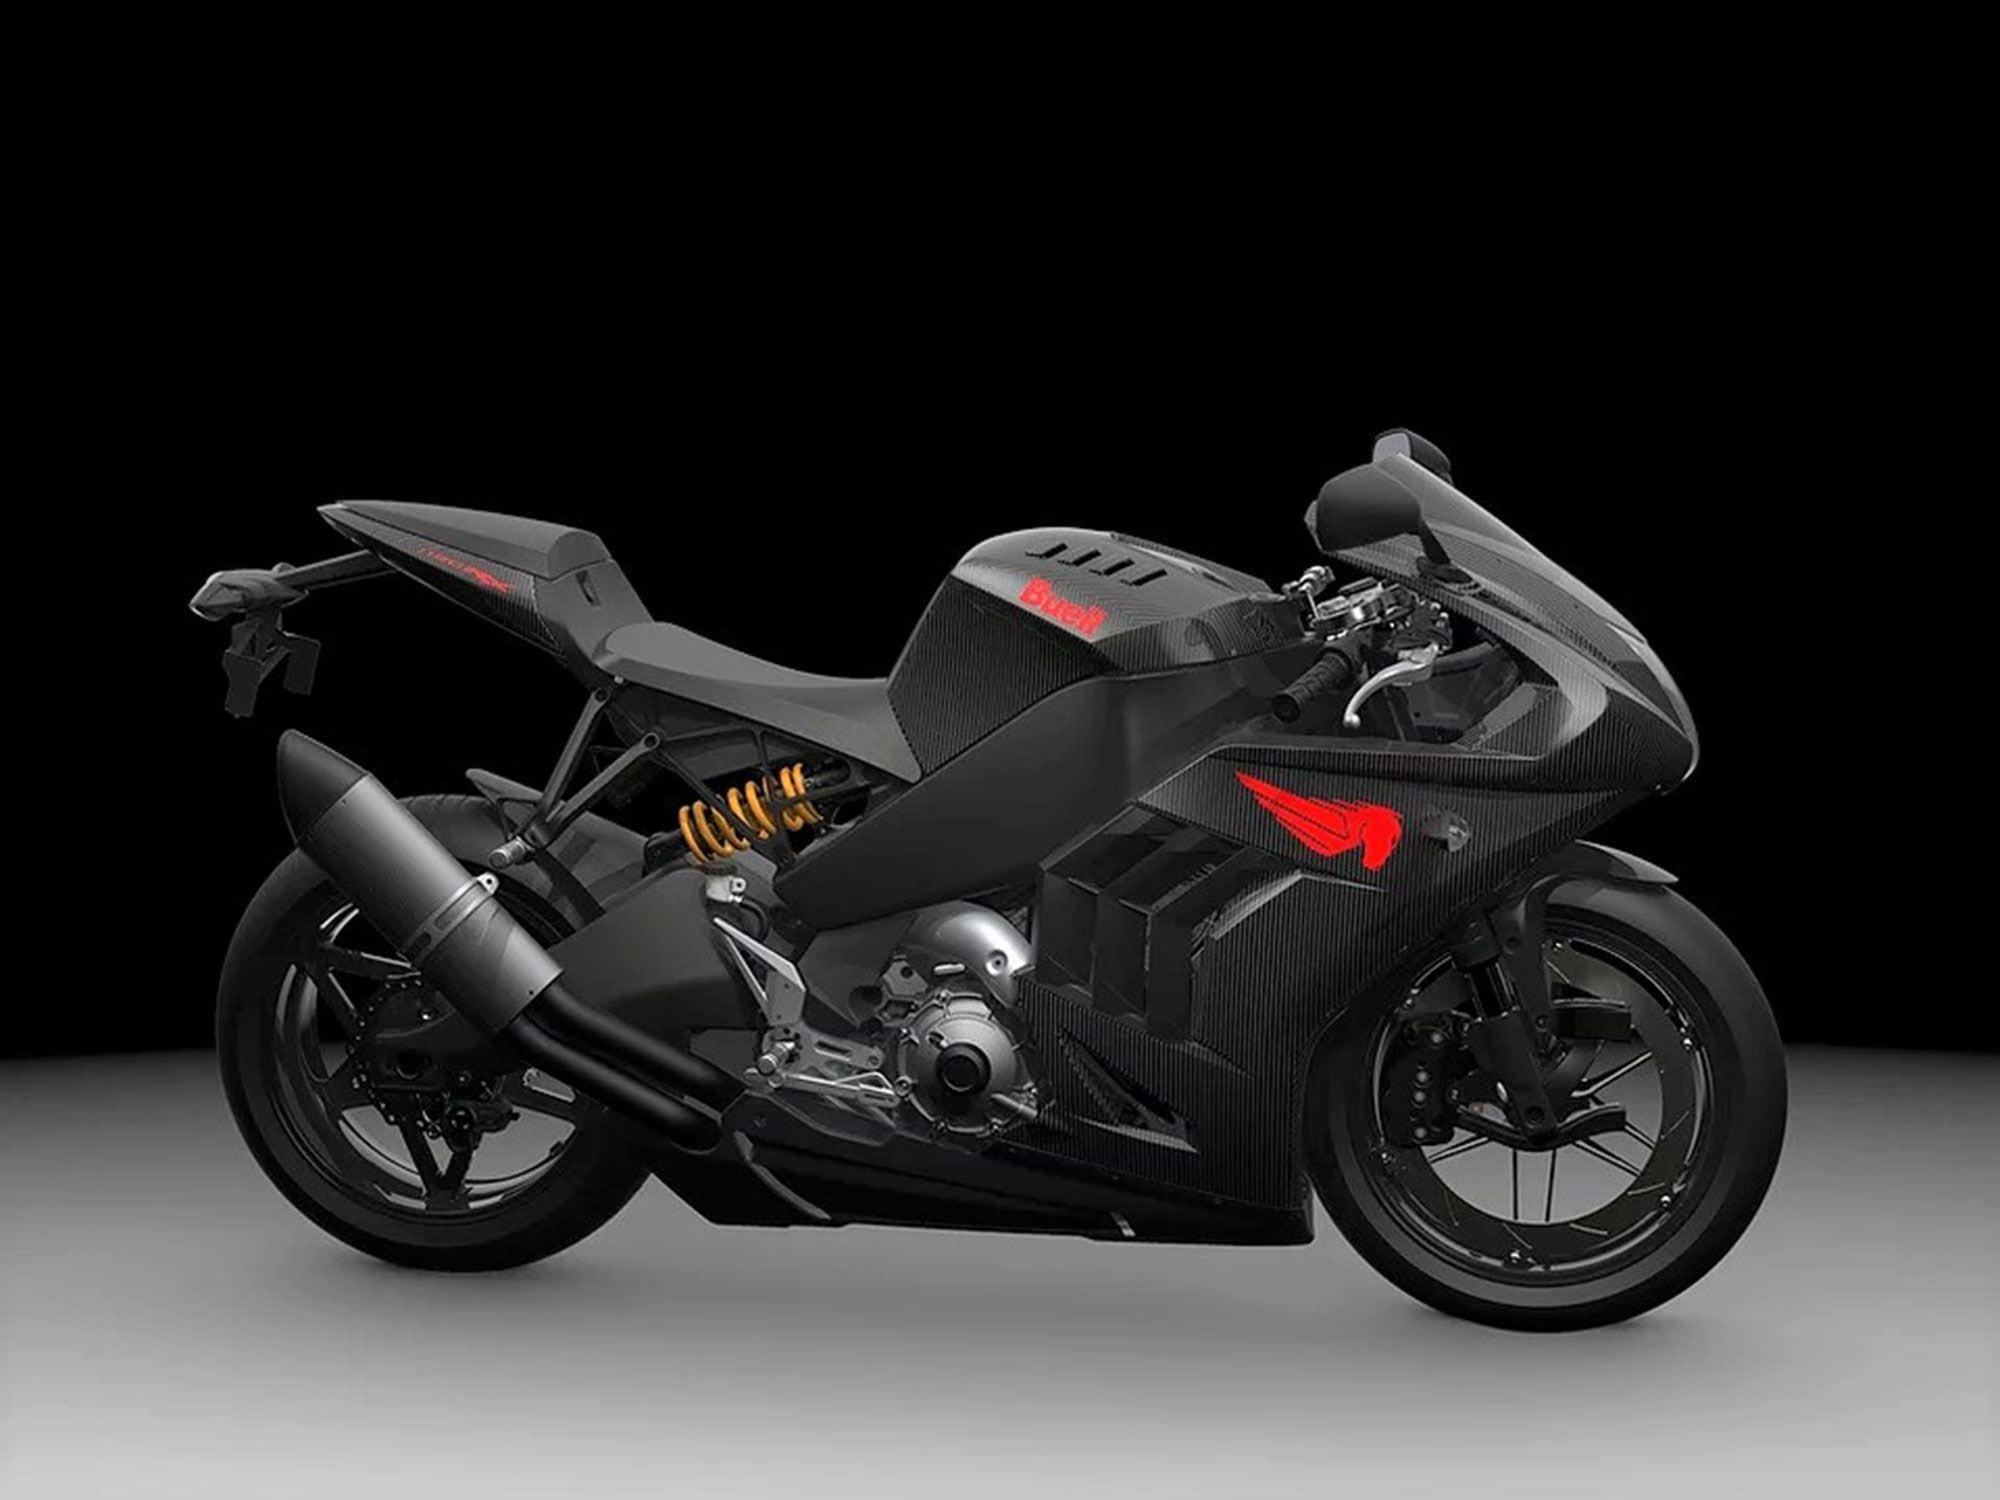 On Buell’s website it’s called the Hammerhead 1190RX and will be available in Carbon Fiber or Heritage liveries.